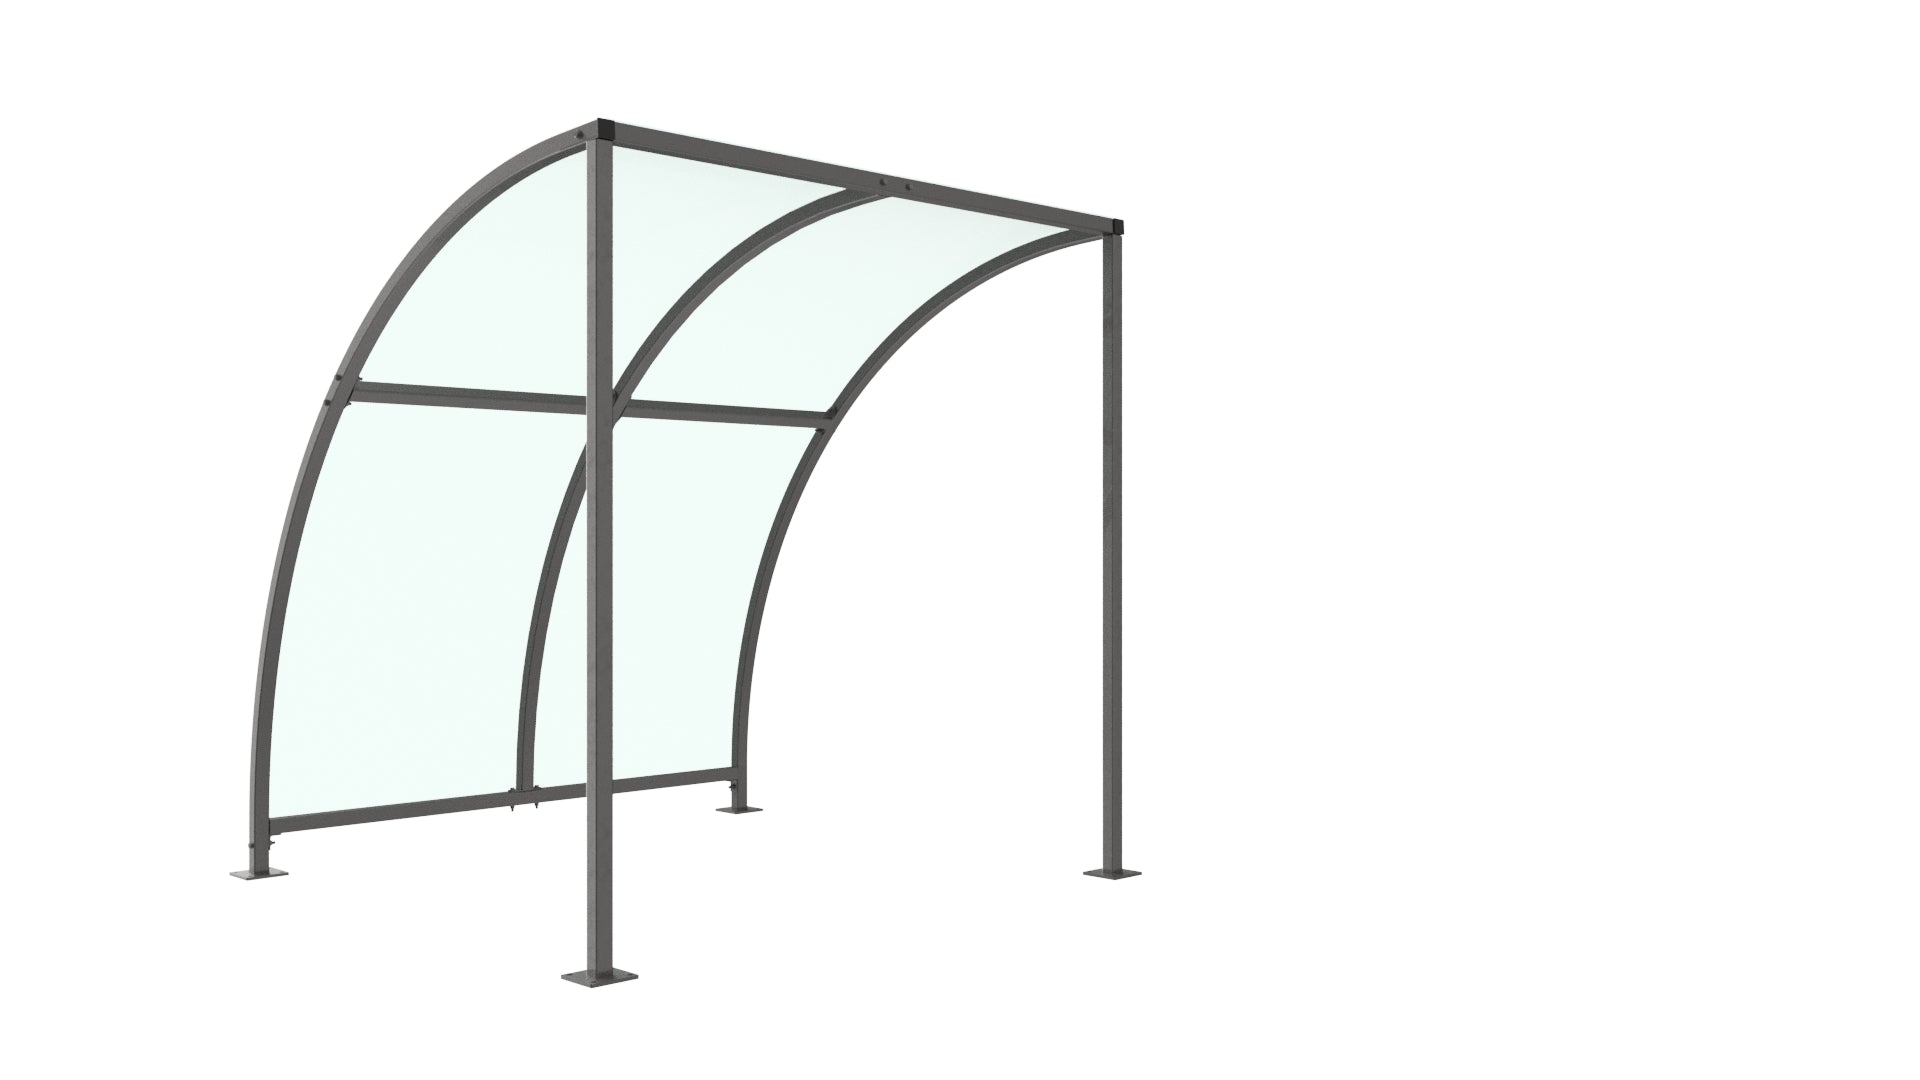 Leyton Cycle Shelter – Open Sided Galvanised Steel Frame